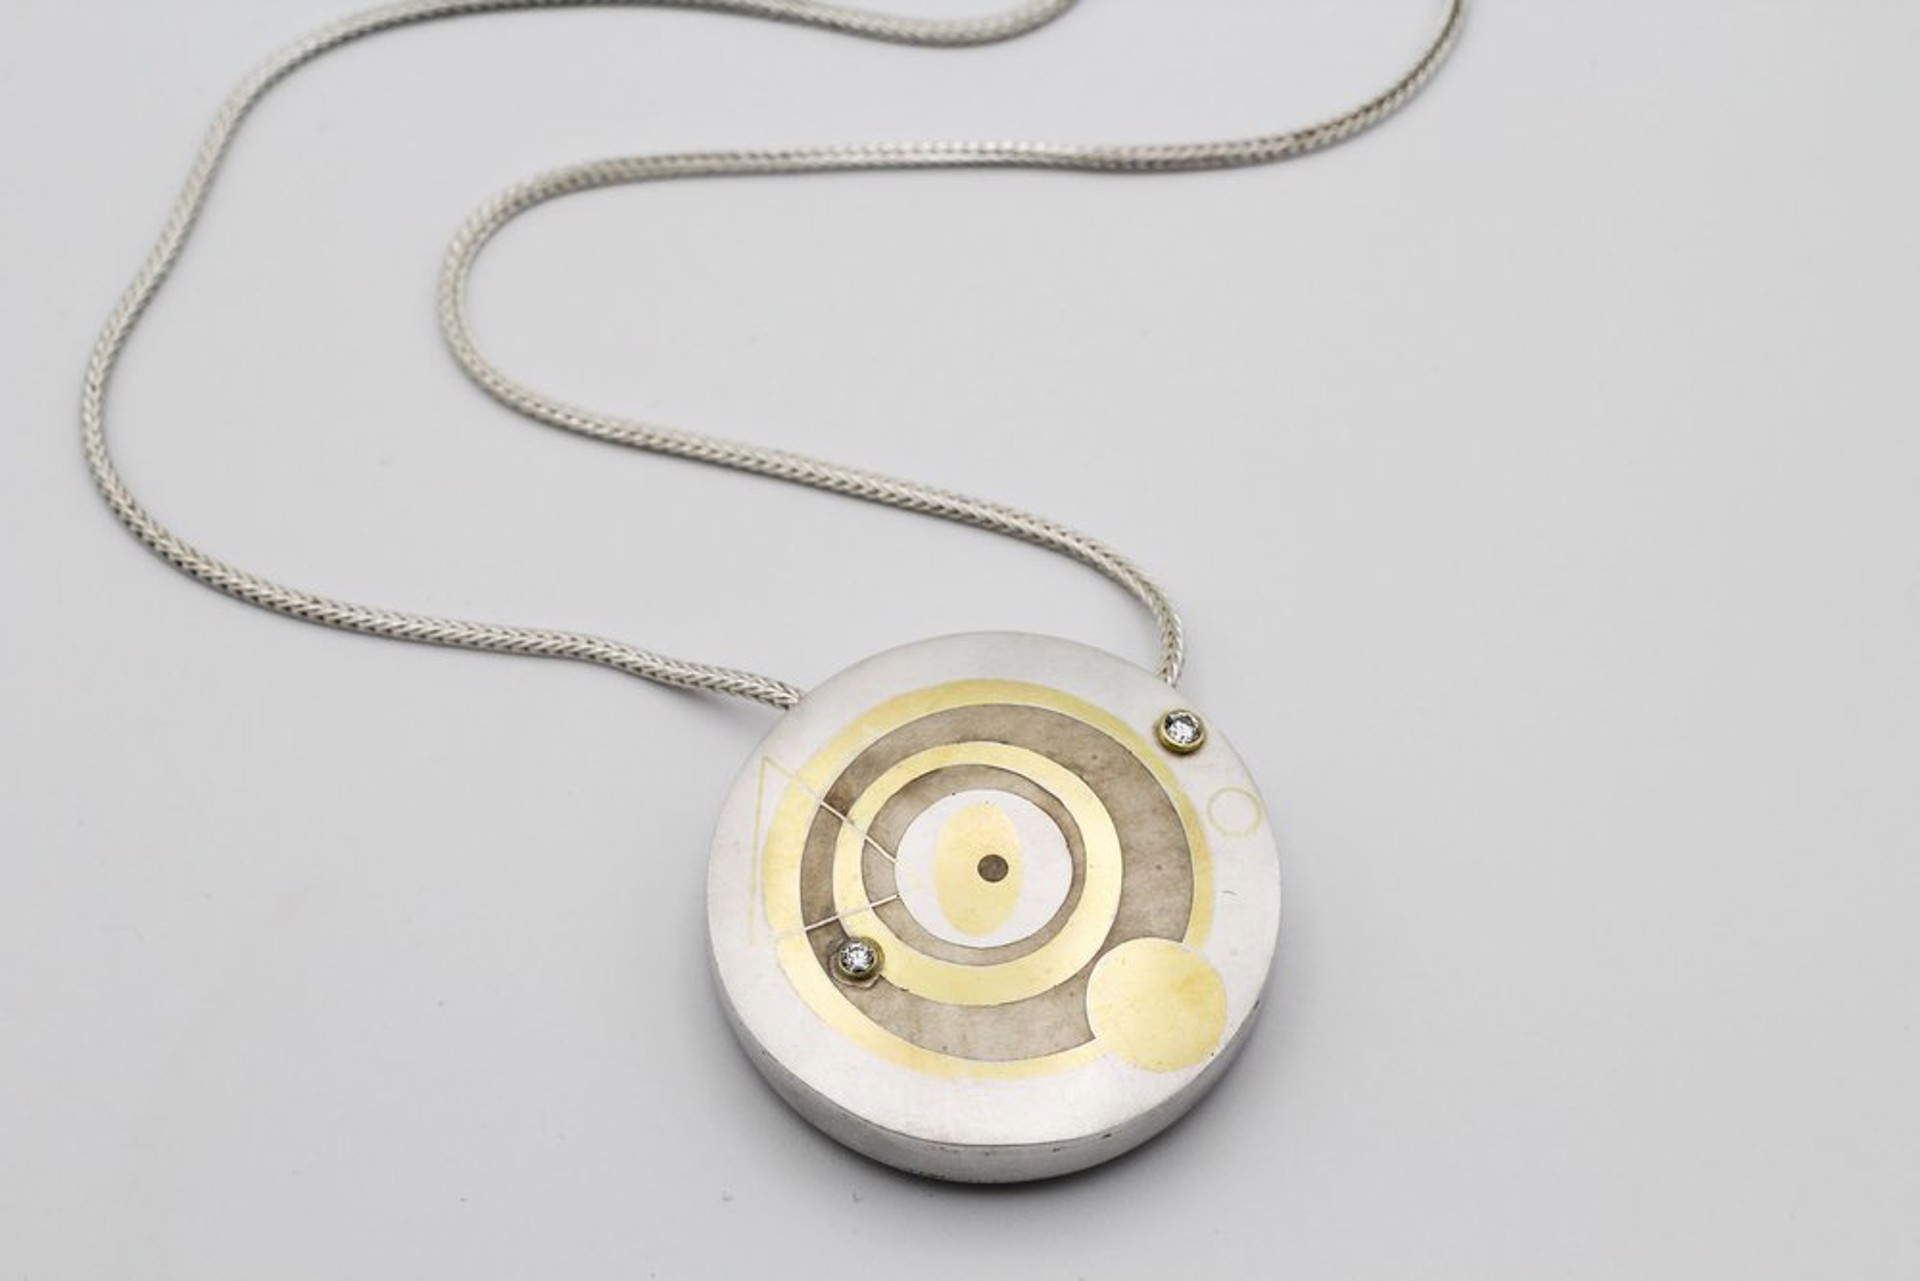 Two-Sided Necklace by Lisa Gralnick